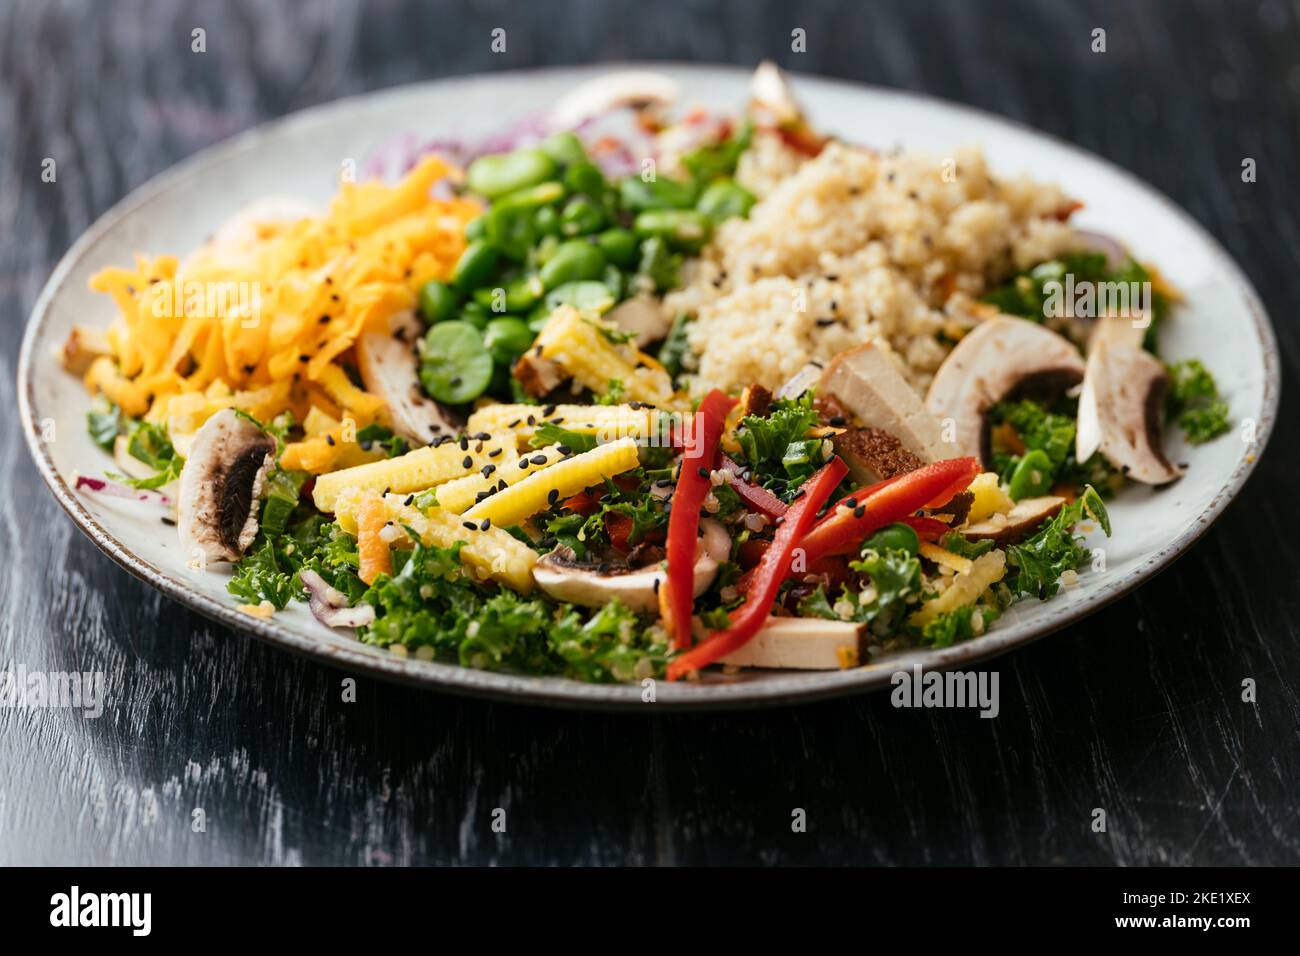 Home made Asian kale salad with quinoa, carrots, fava beans, bell pepper, baby corn, mushrooms and smoked tofu Stock Photo